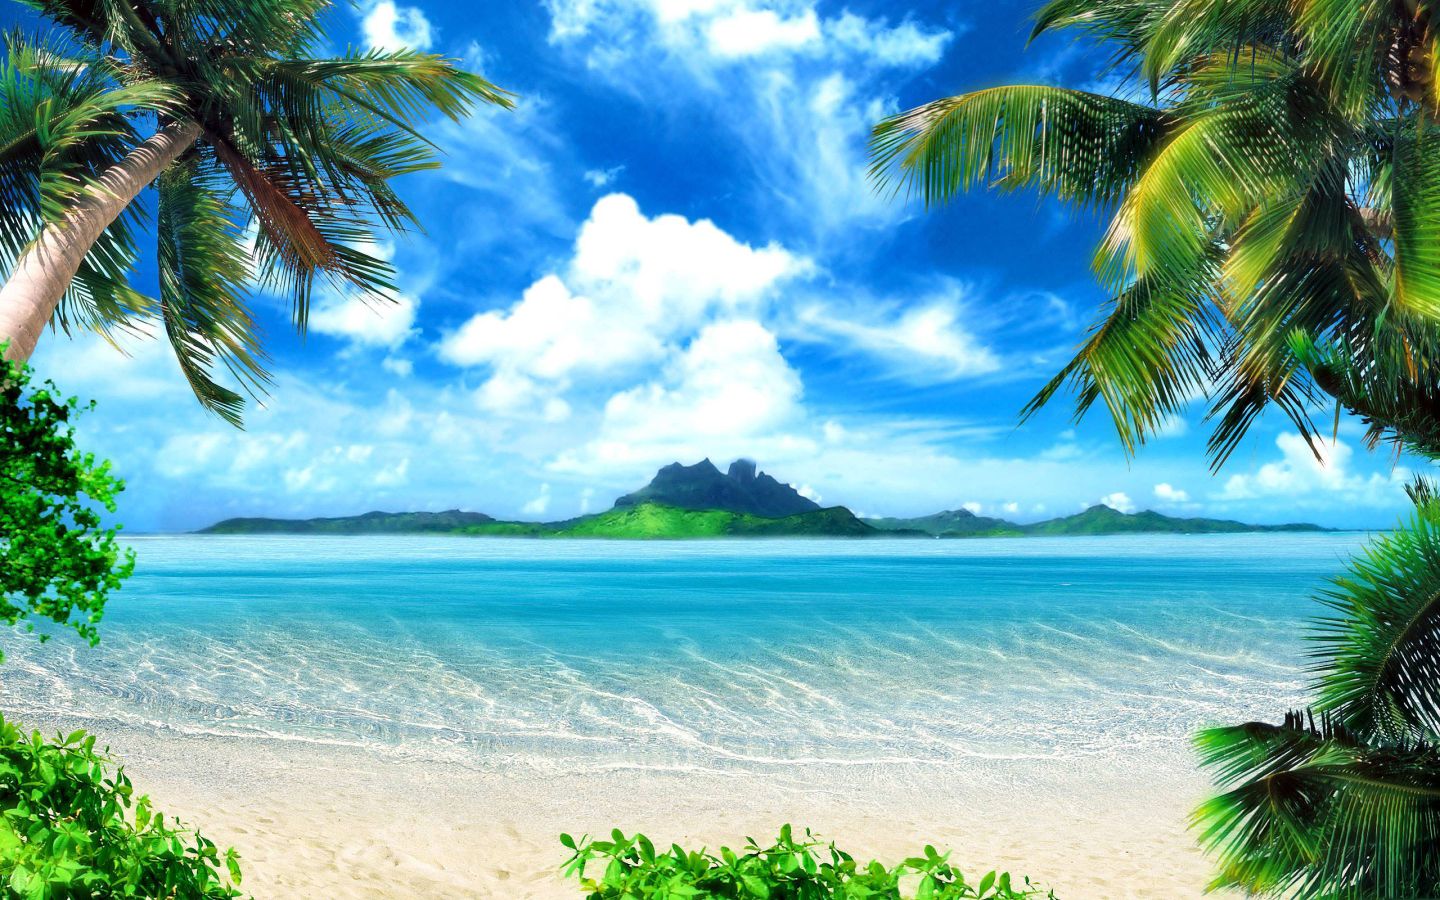 Download Tropical Beach Wallpapers in HD